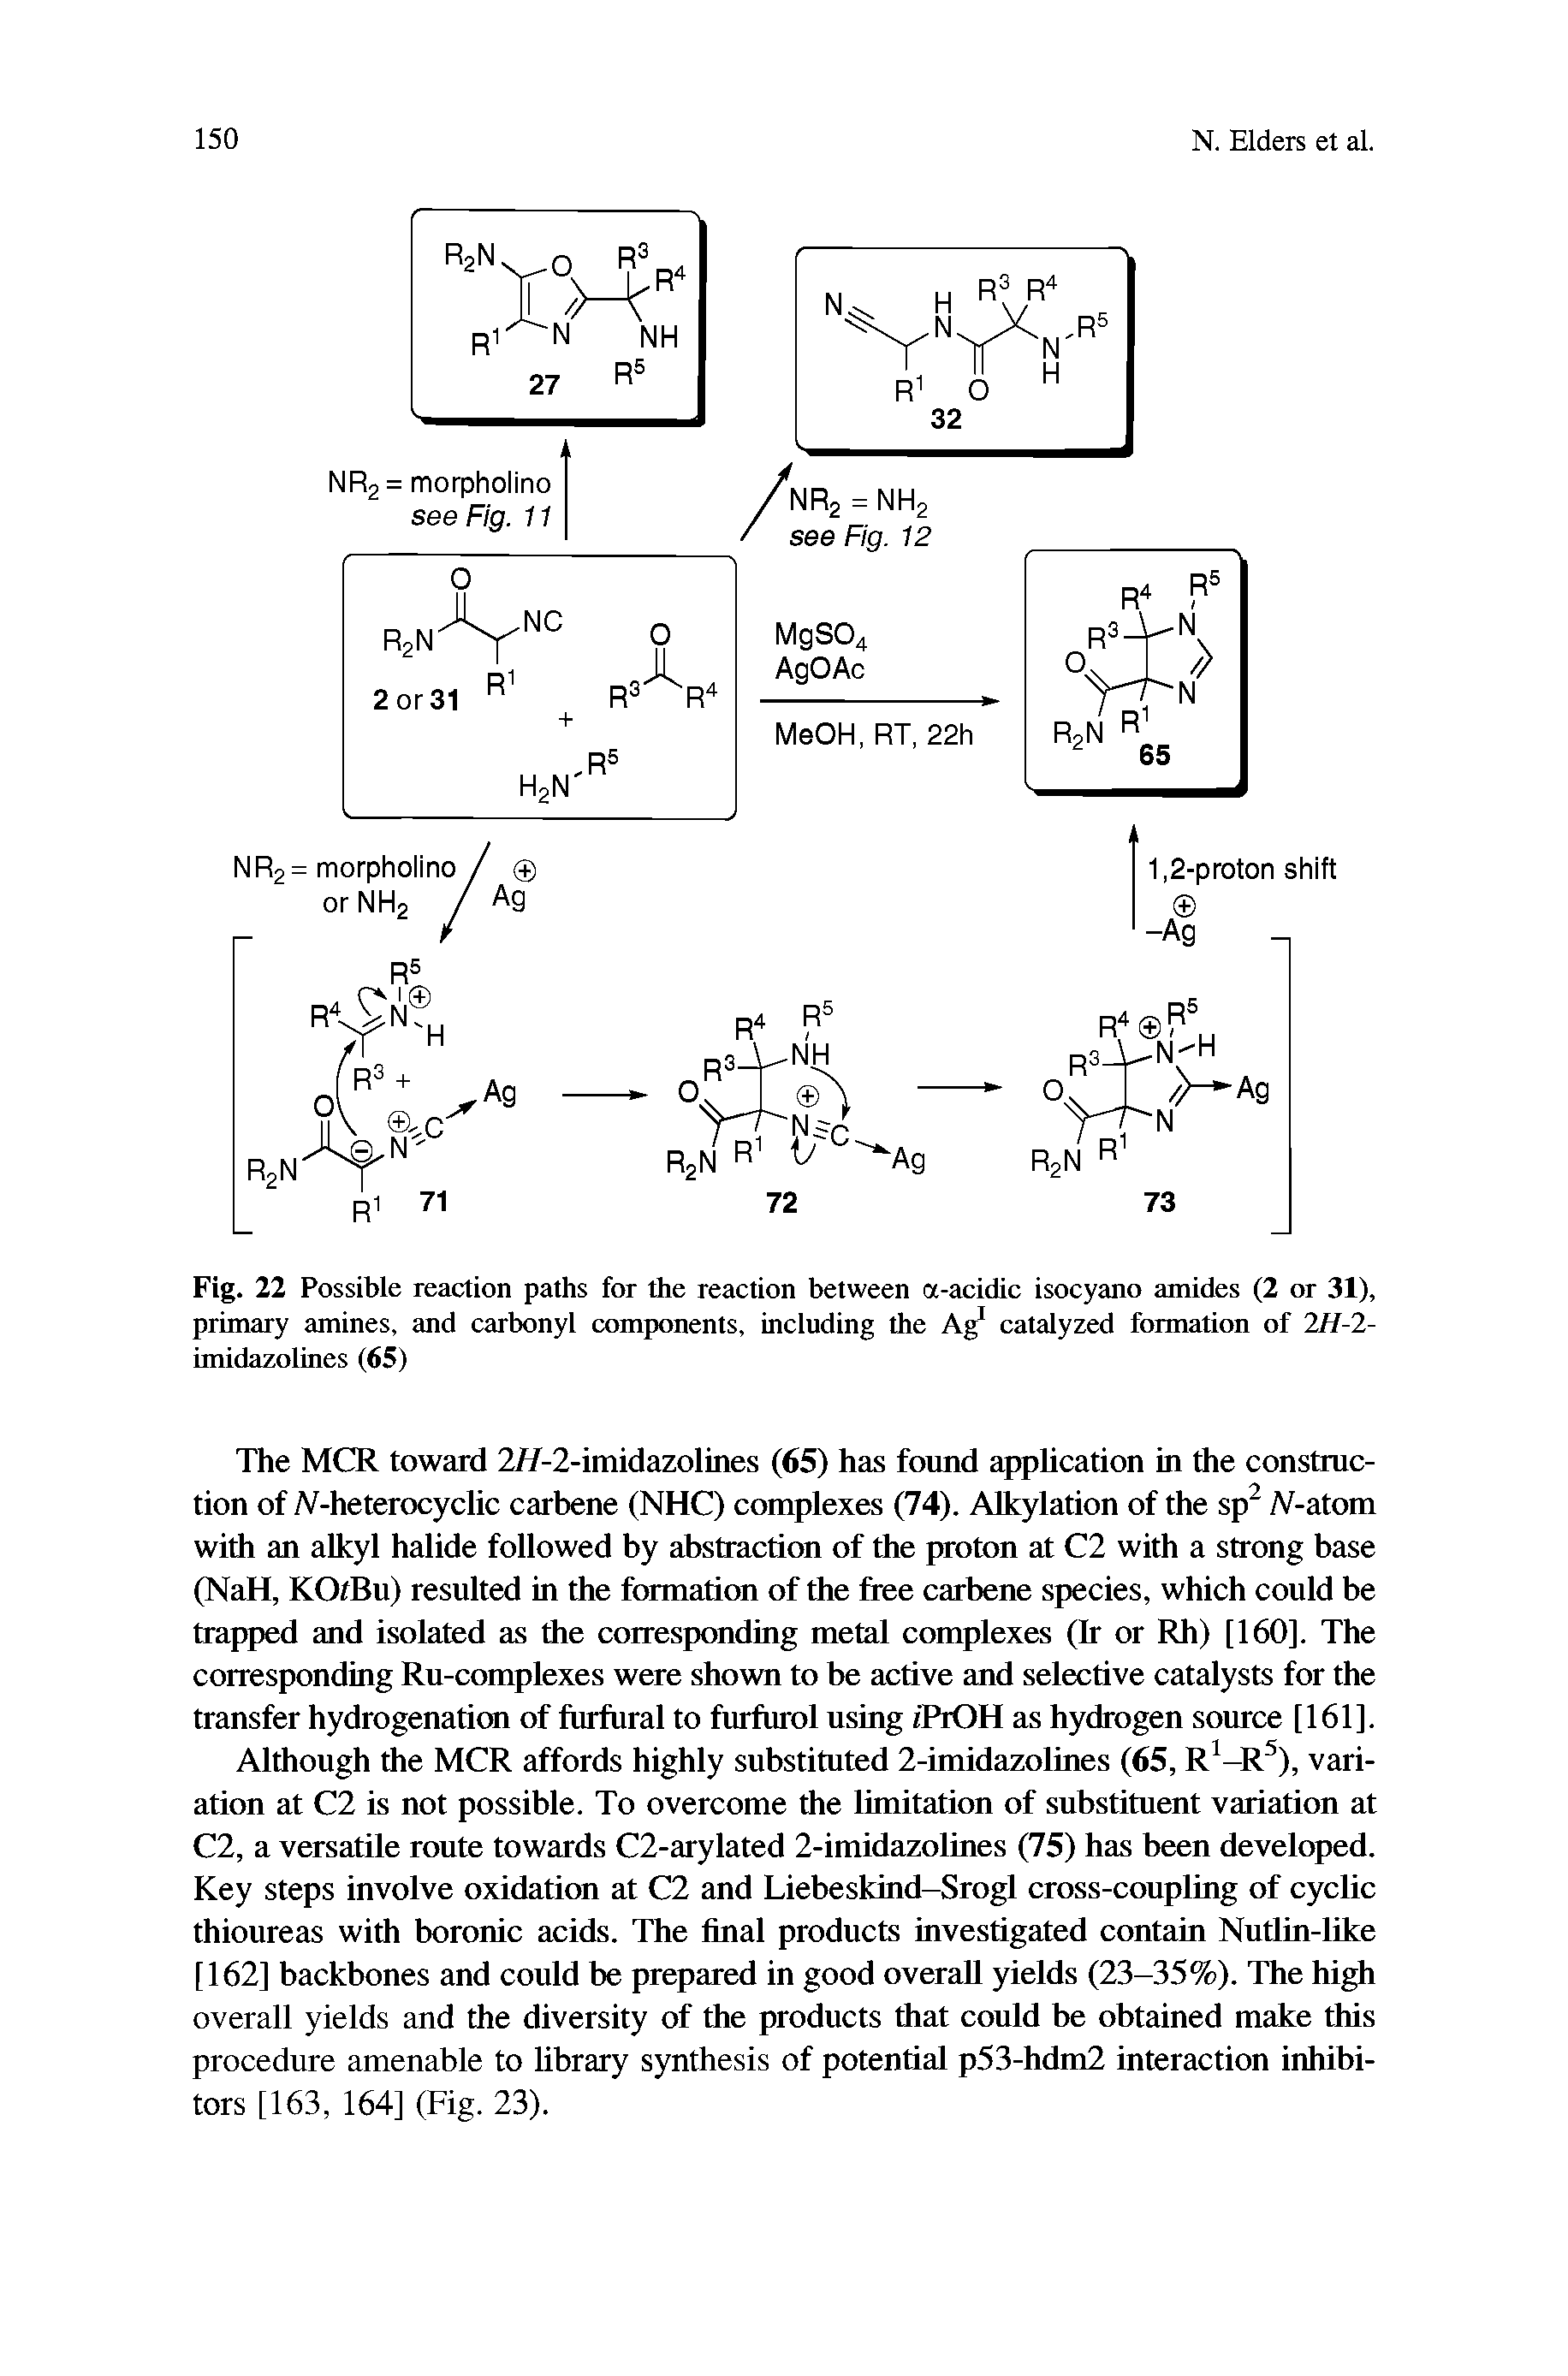 Fig. 22 Possible reaction paths for the reaction between a-acidic isocyano amides (2 or 31), primary amines, and carbonyl components, including the Ag catalyzed formation of 2//-2-imidazolines (65)...